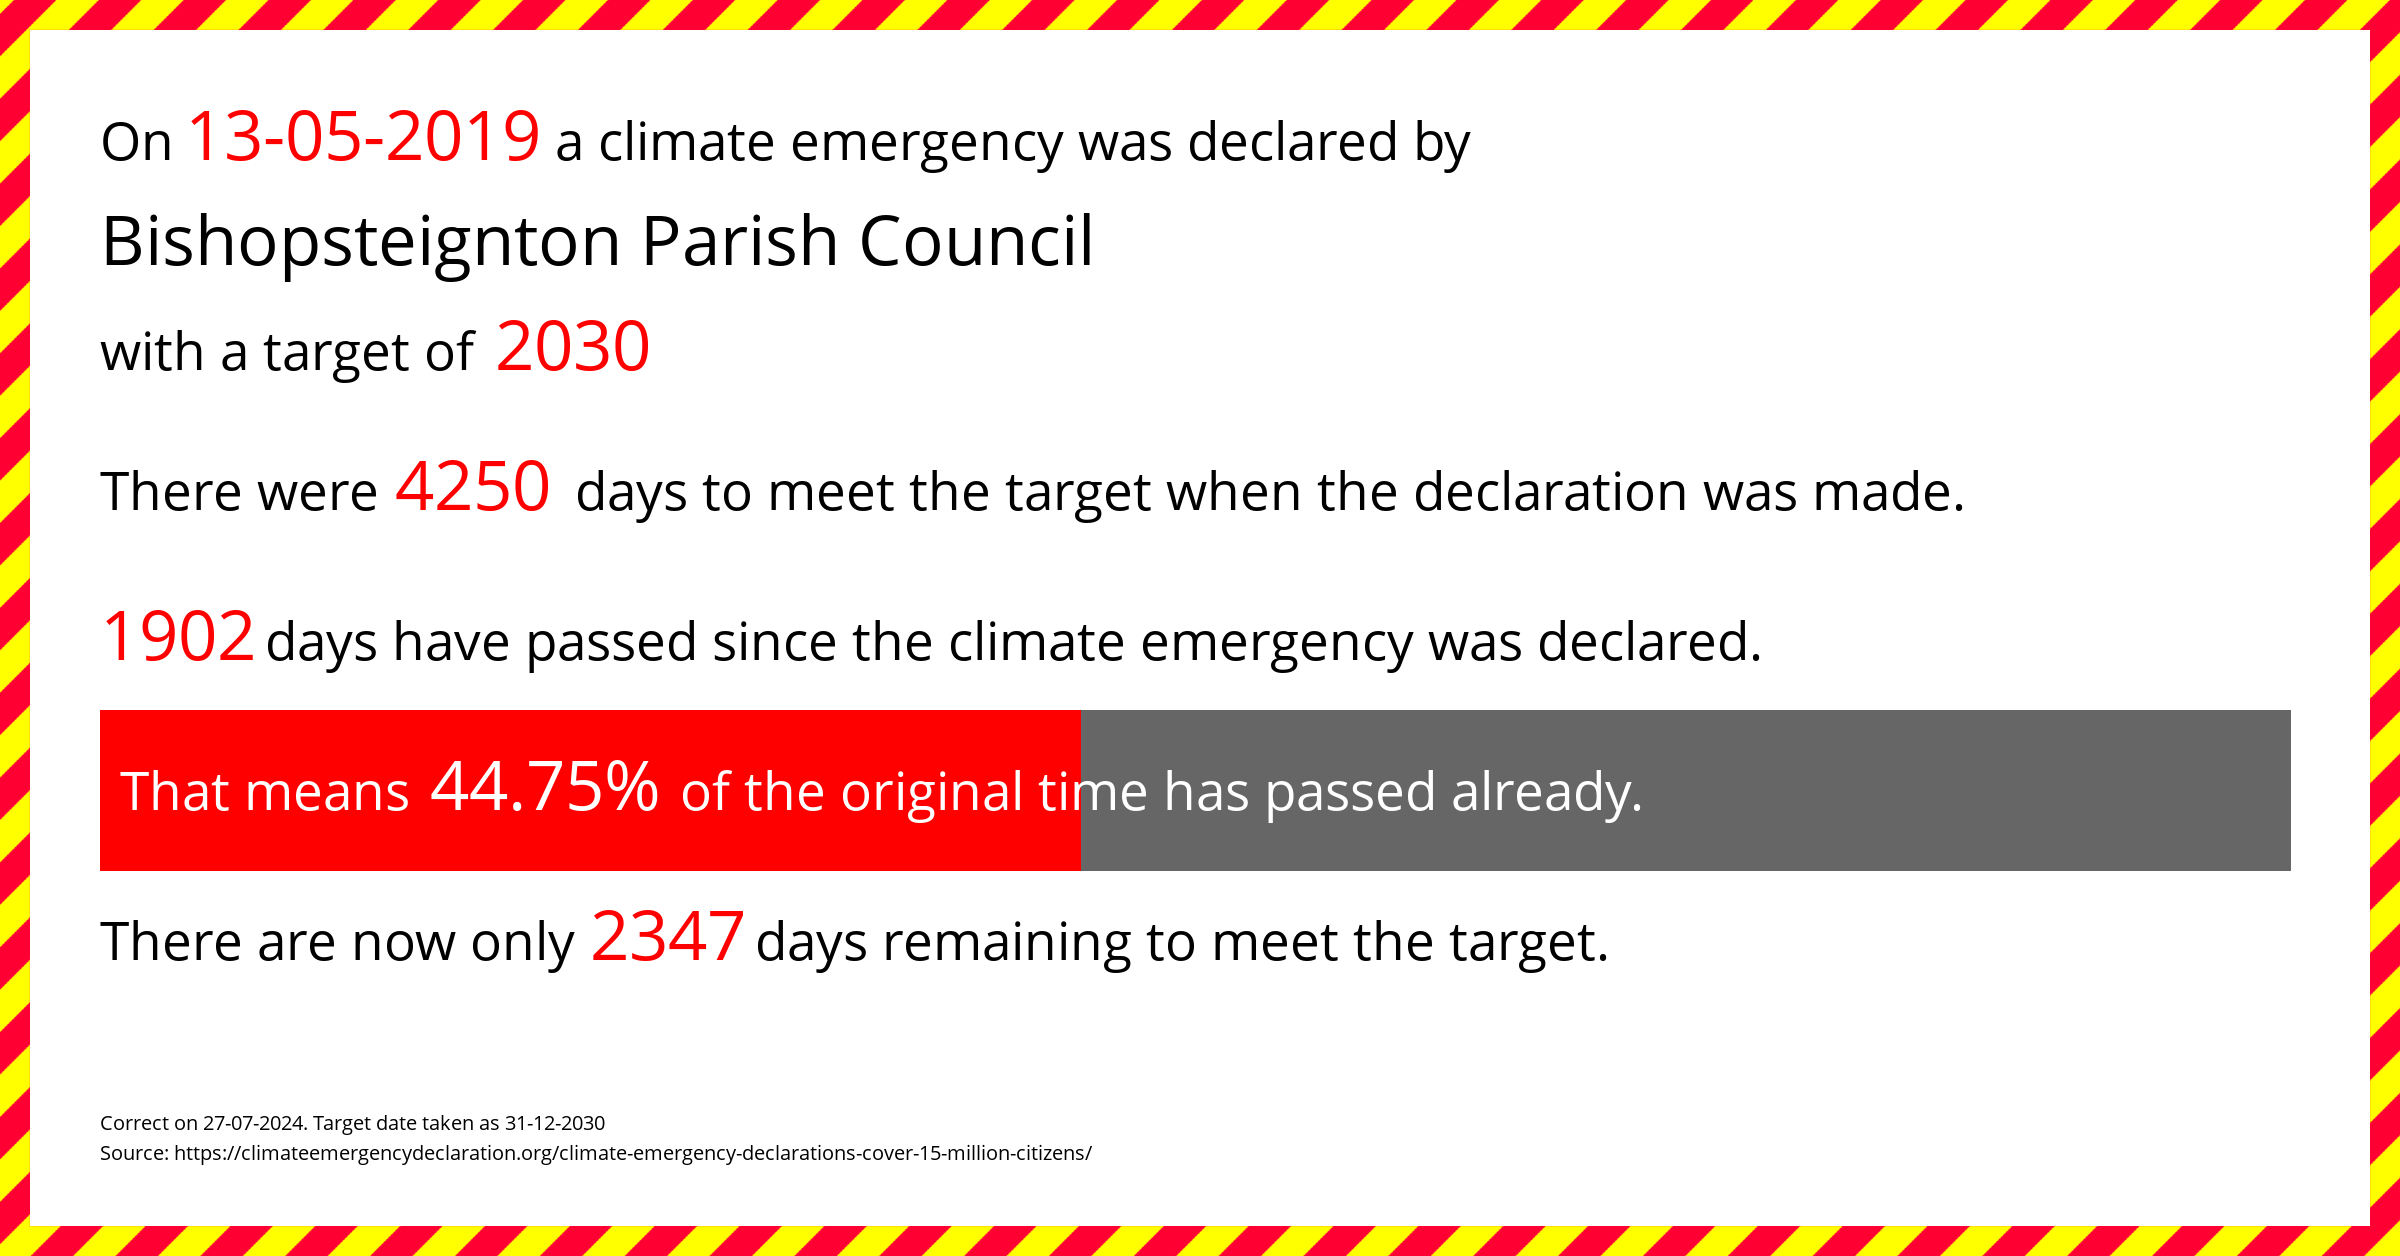 Bishopsteignton Parish Council declared a Climate emergency on Monday 13th May 2019, with a target of 2030.